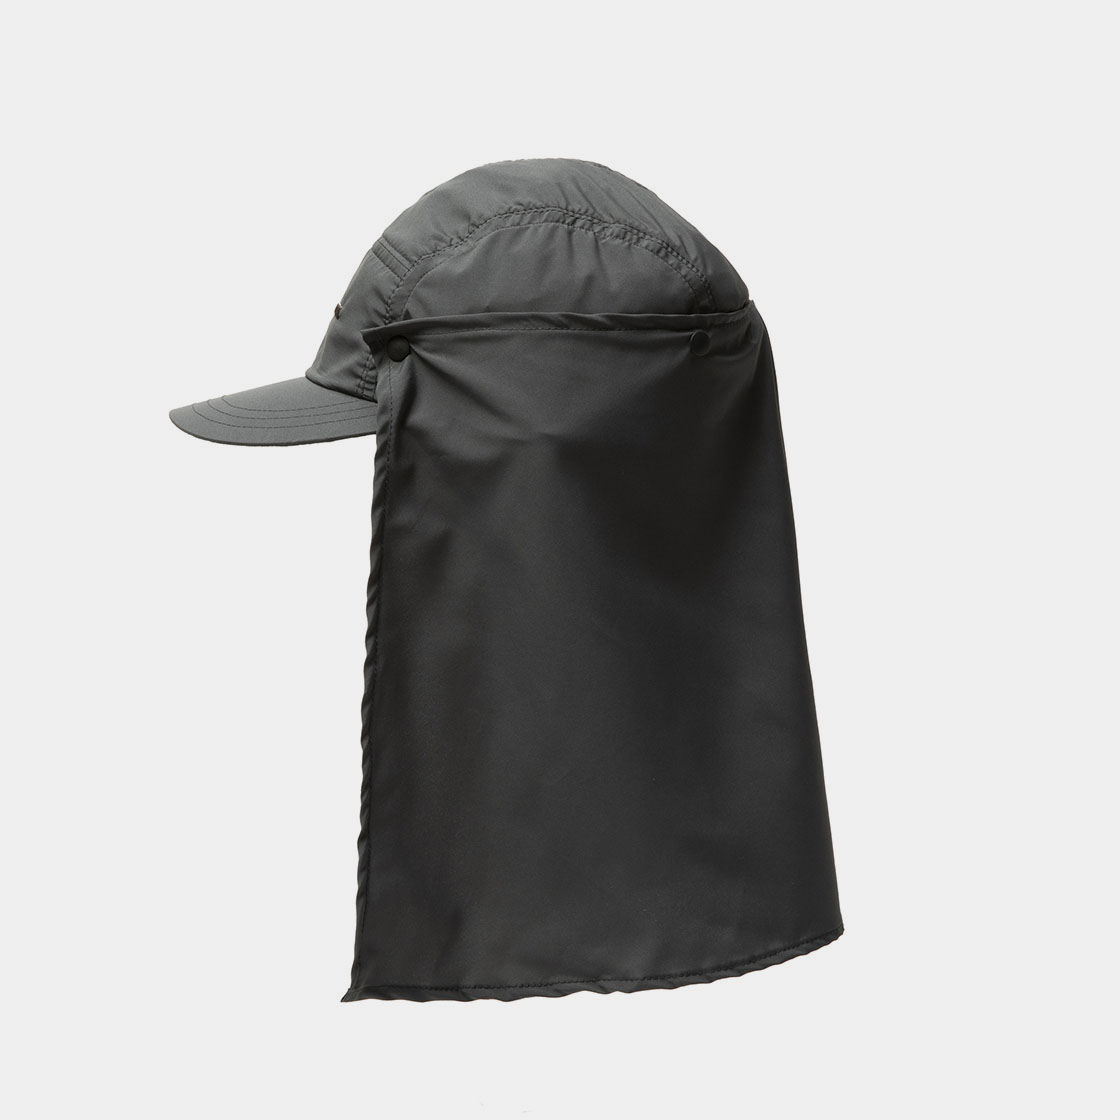 Feather Smooth Shade Cap / Charcoal